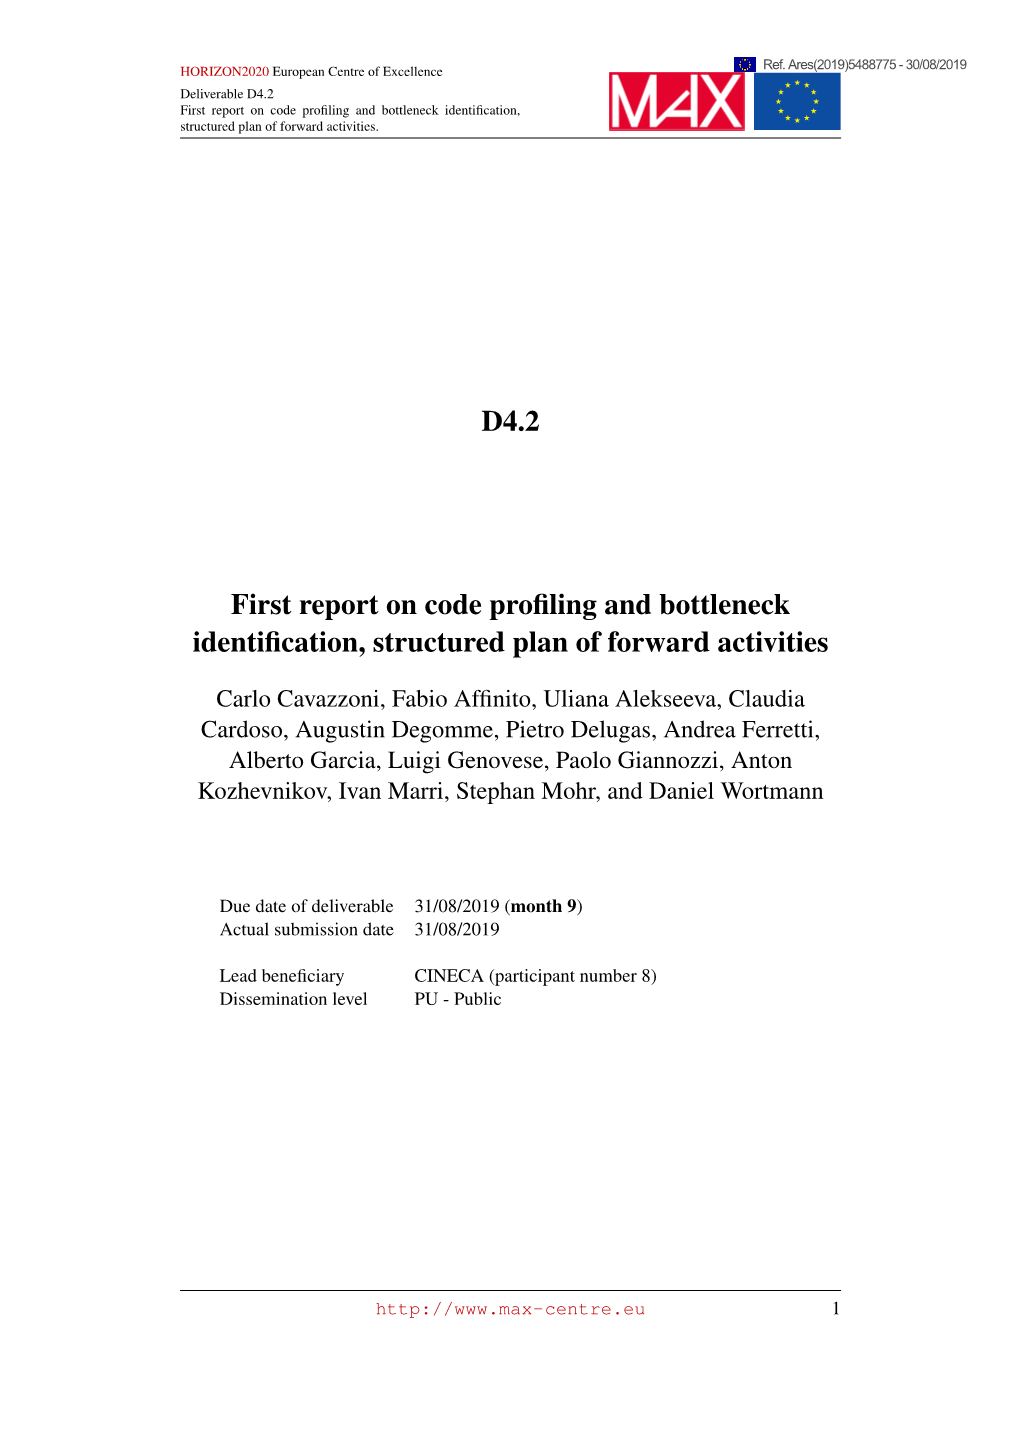 D4.2 First Report on Code Profiling and Bottleneck Identification, Structured